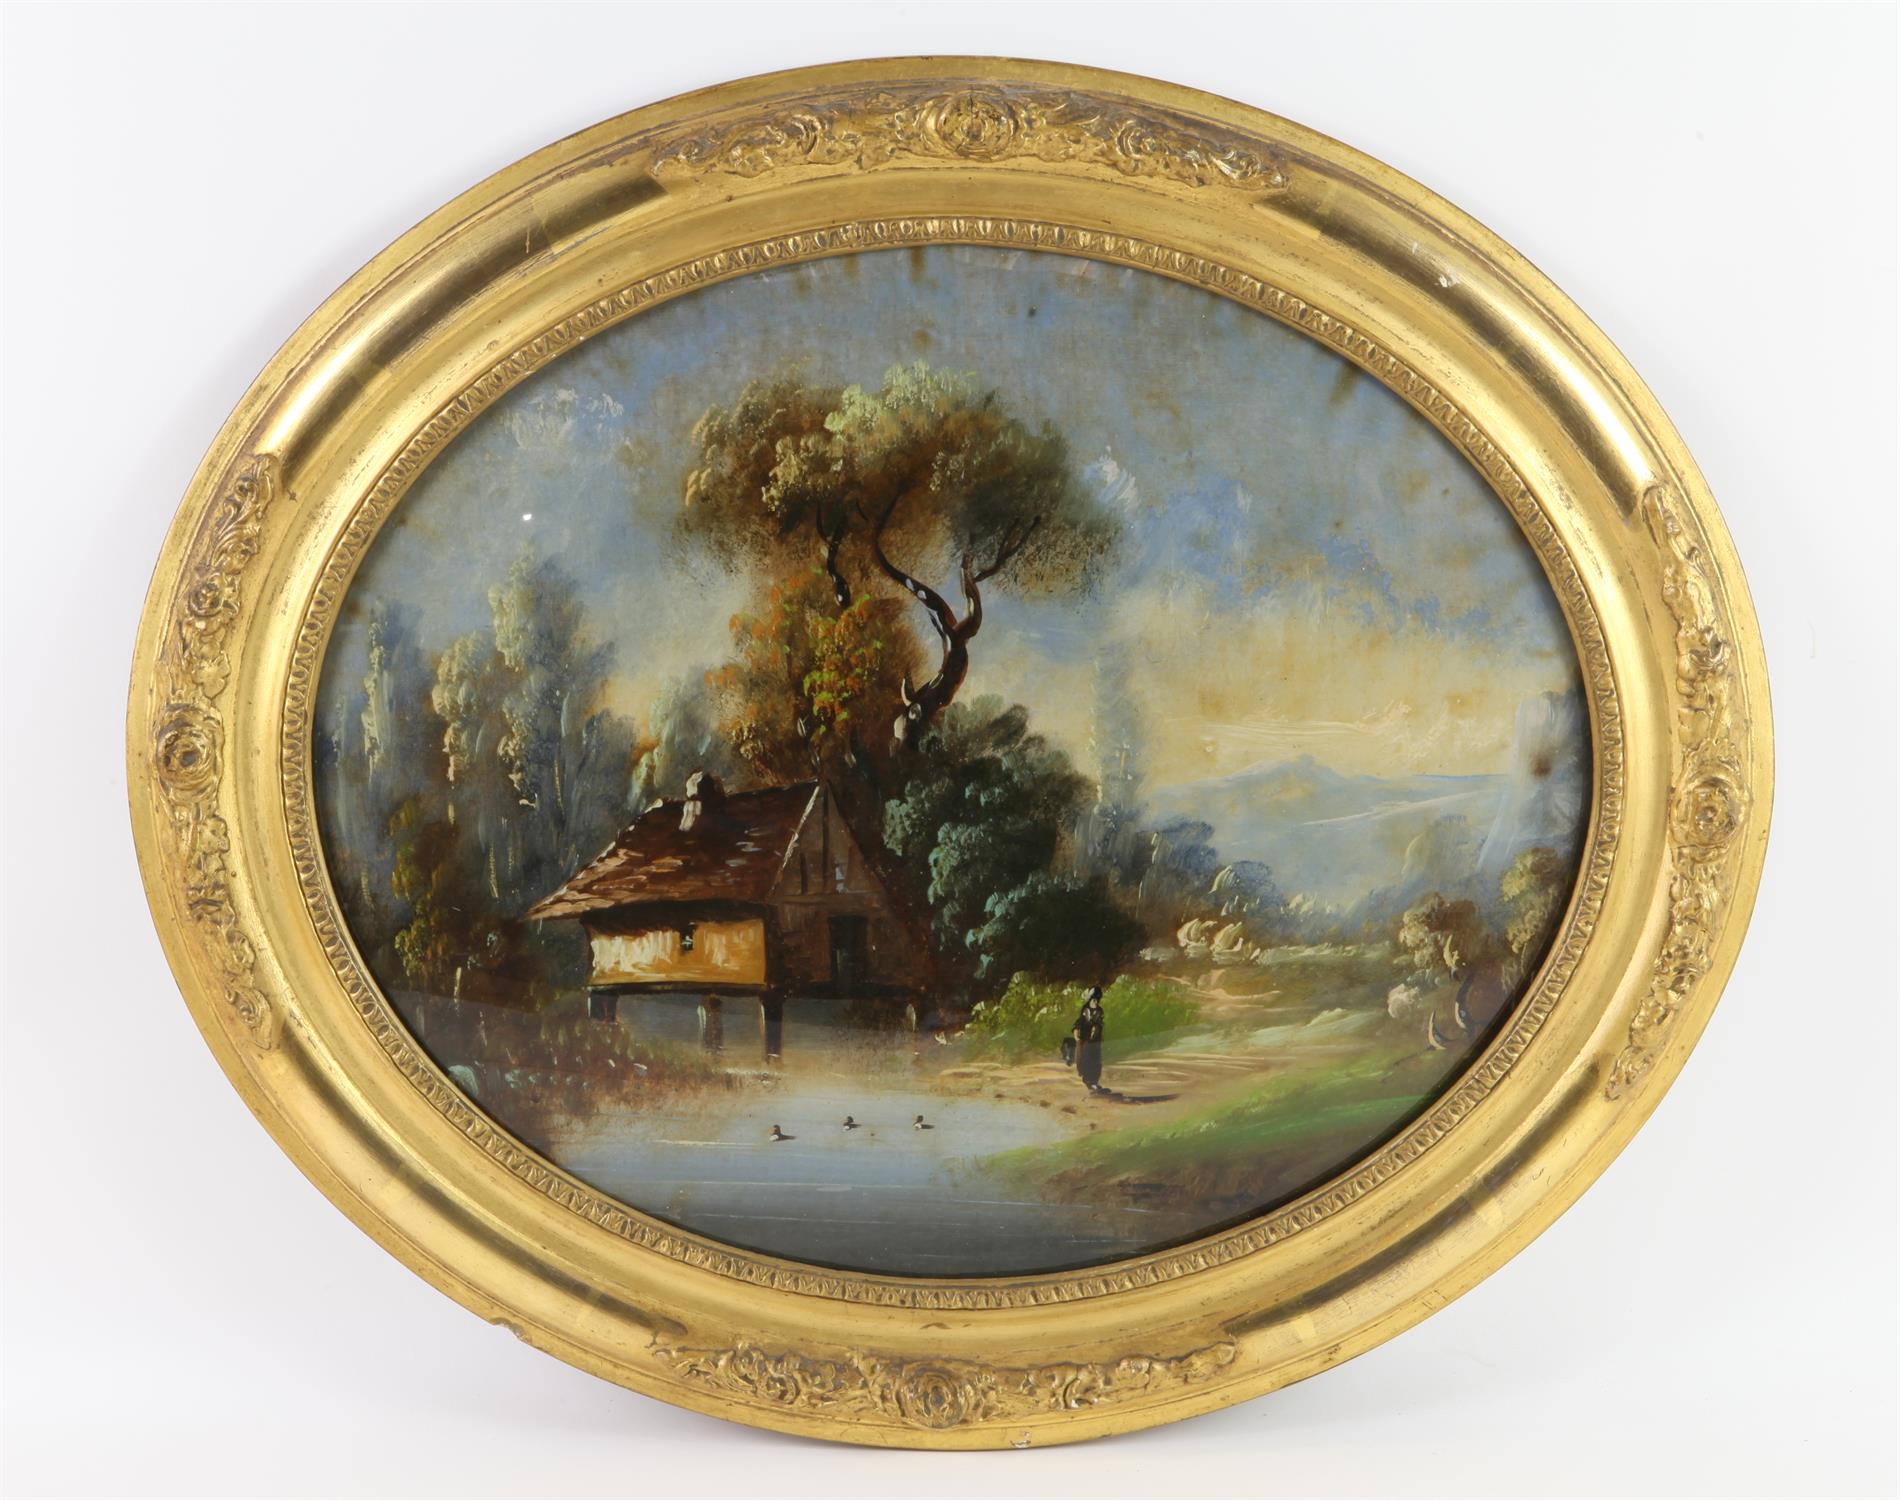 Nineteenth-century European School, oval landscape with cottage to foreground. Oil on glass. Framed.